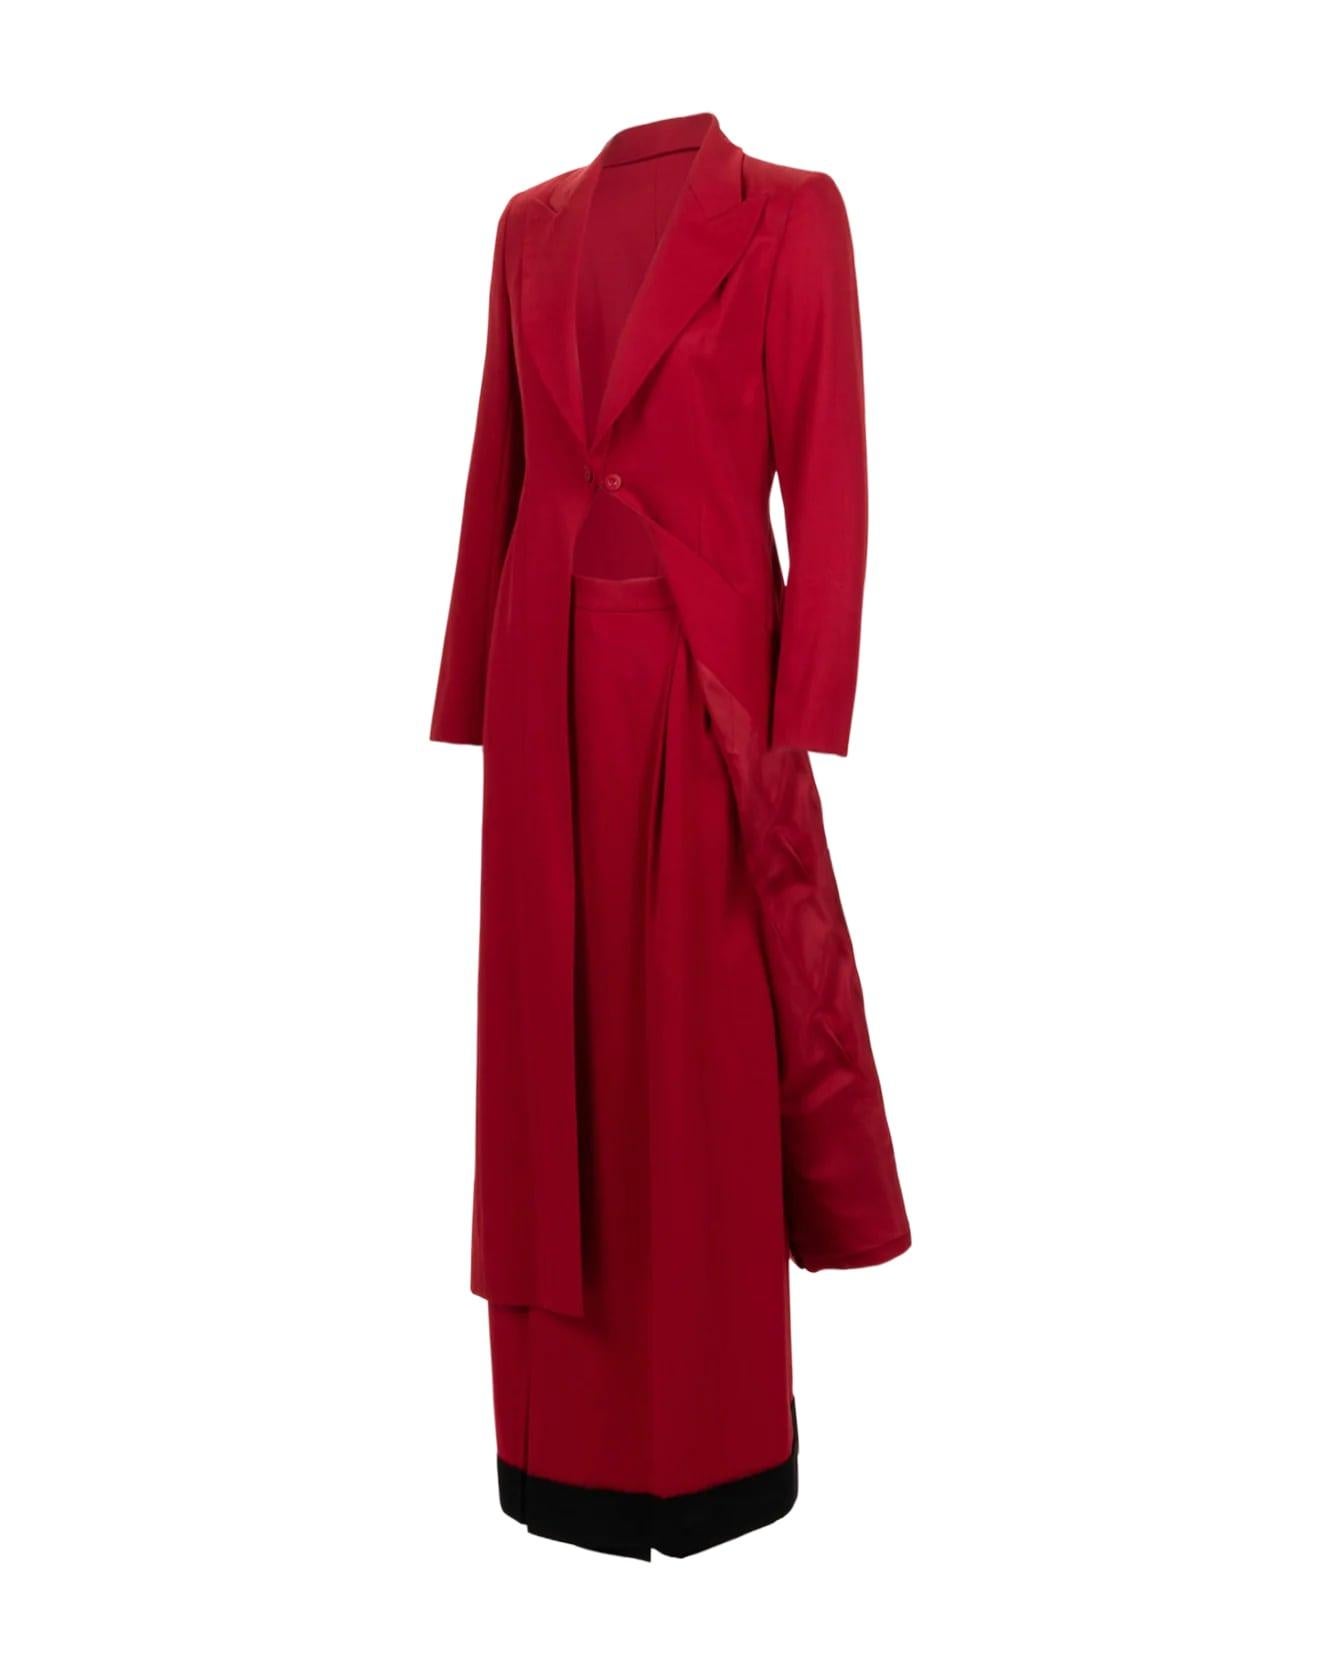 S/S 1997 Givenchy Couture by Alexander McQueen red wool two-piece pant set. Long red jacket with peaked lapel, and front bust closure. Wide leg wrap pants with black wool trim at hem. As seen on the runway in inverted colorway.